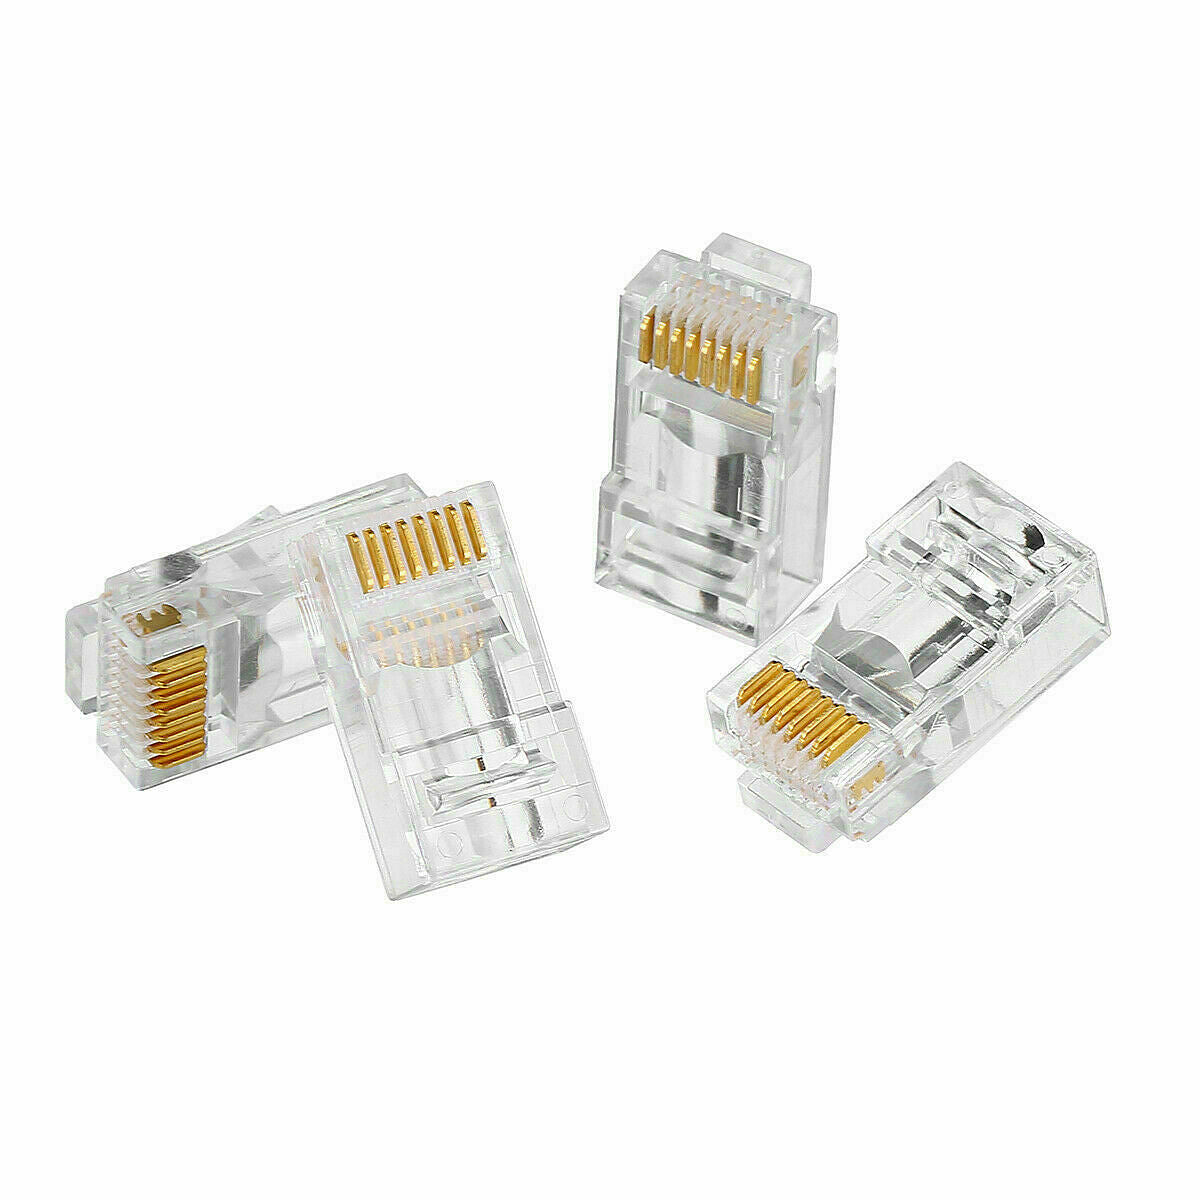 CAT5e RJ45 Connector Pass-Through network Cable